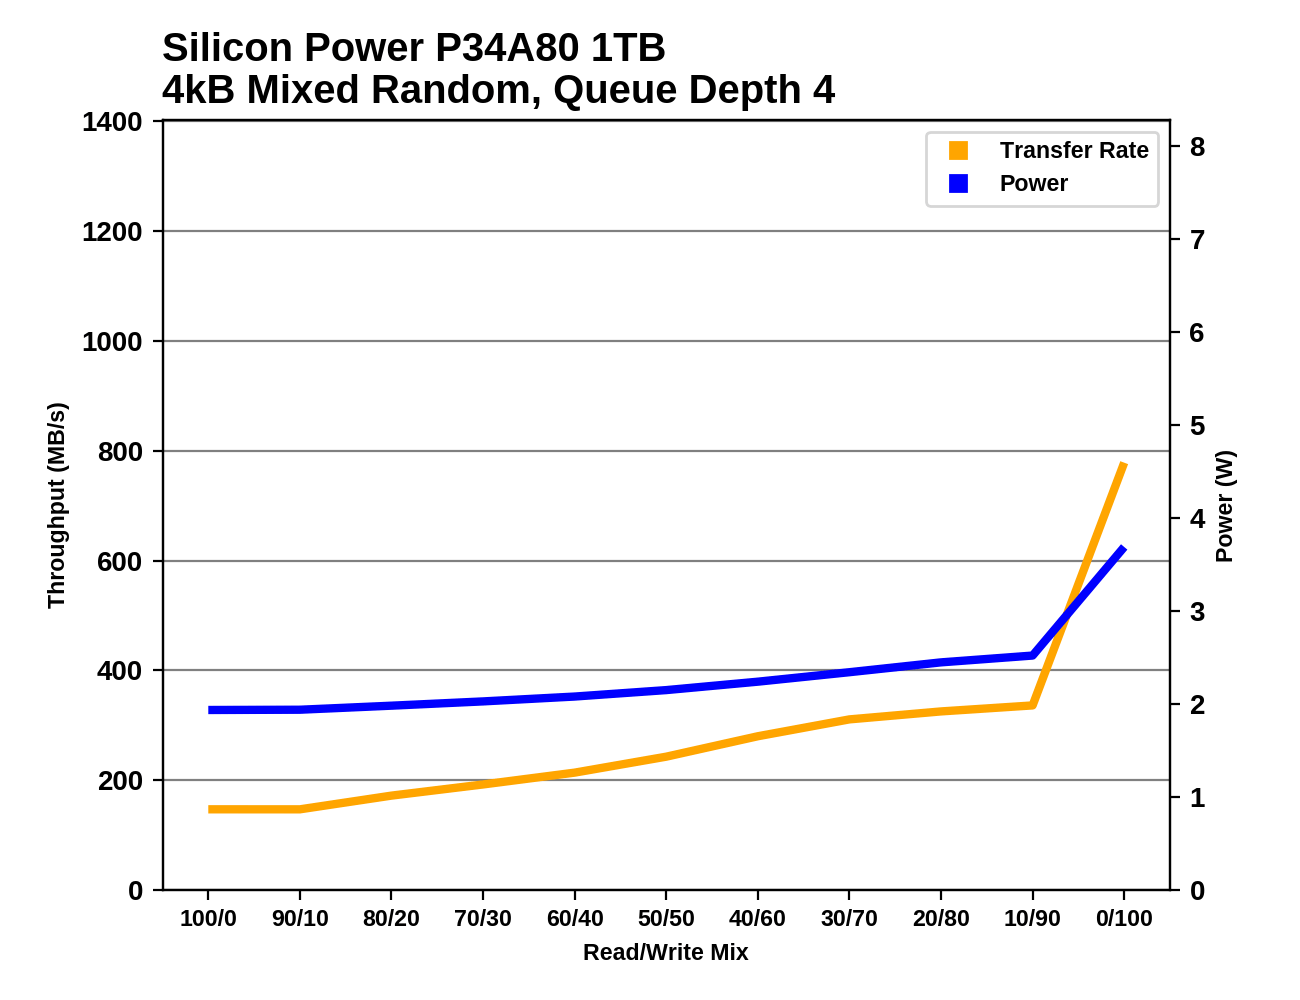 Mixed Read/Write - The Silicon Power P34A80 SSD Review: Phison E12 With Newer Firmware